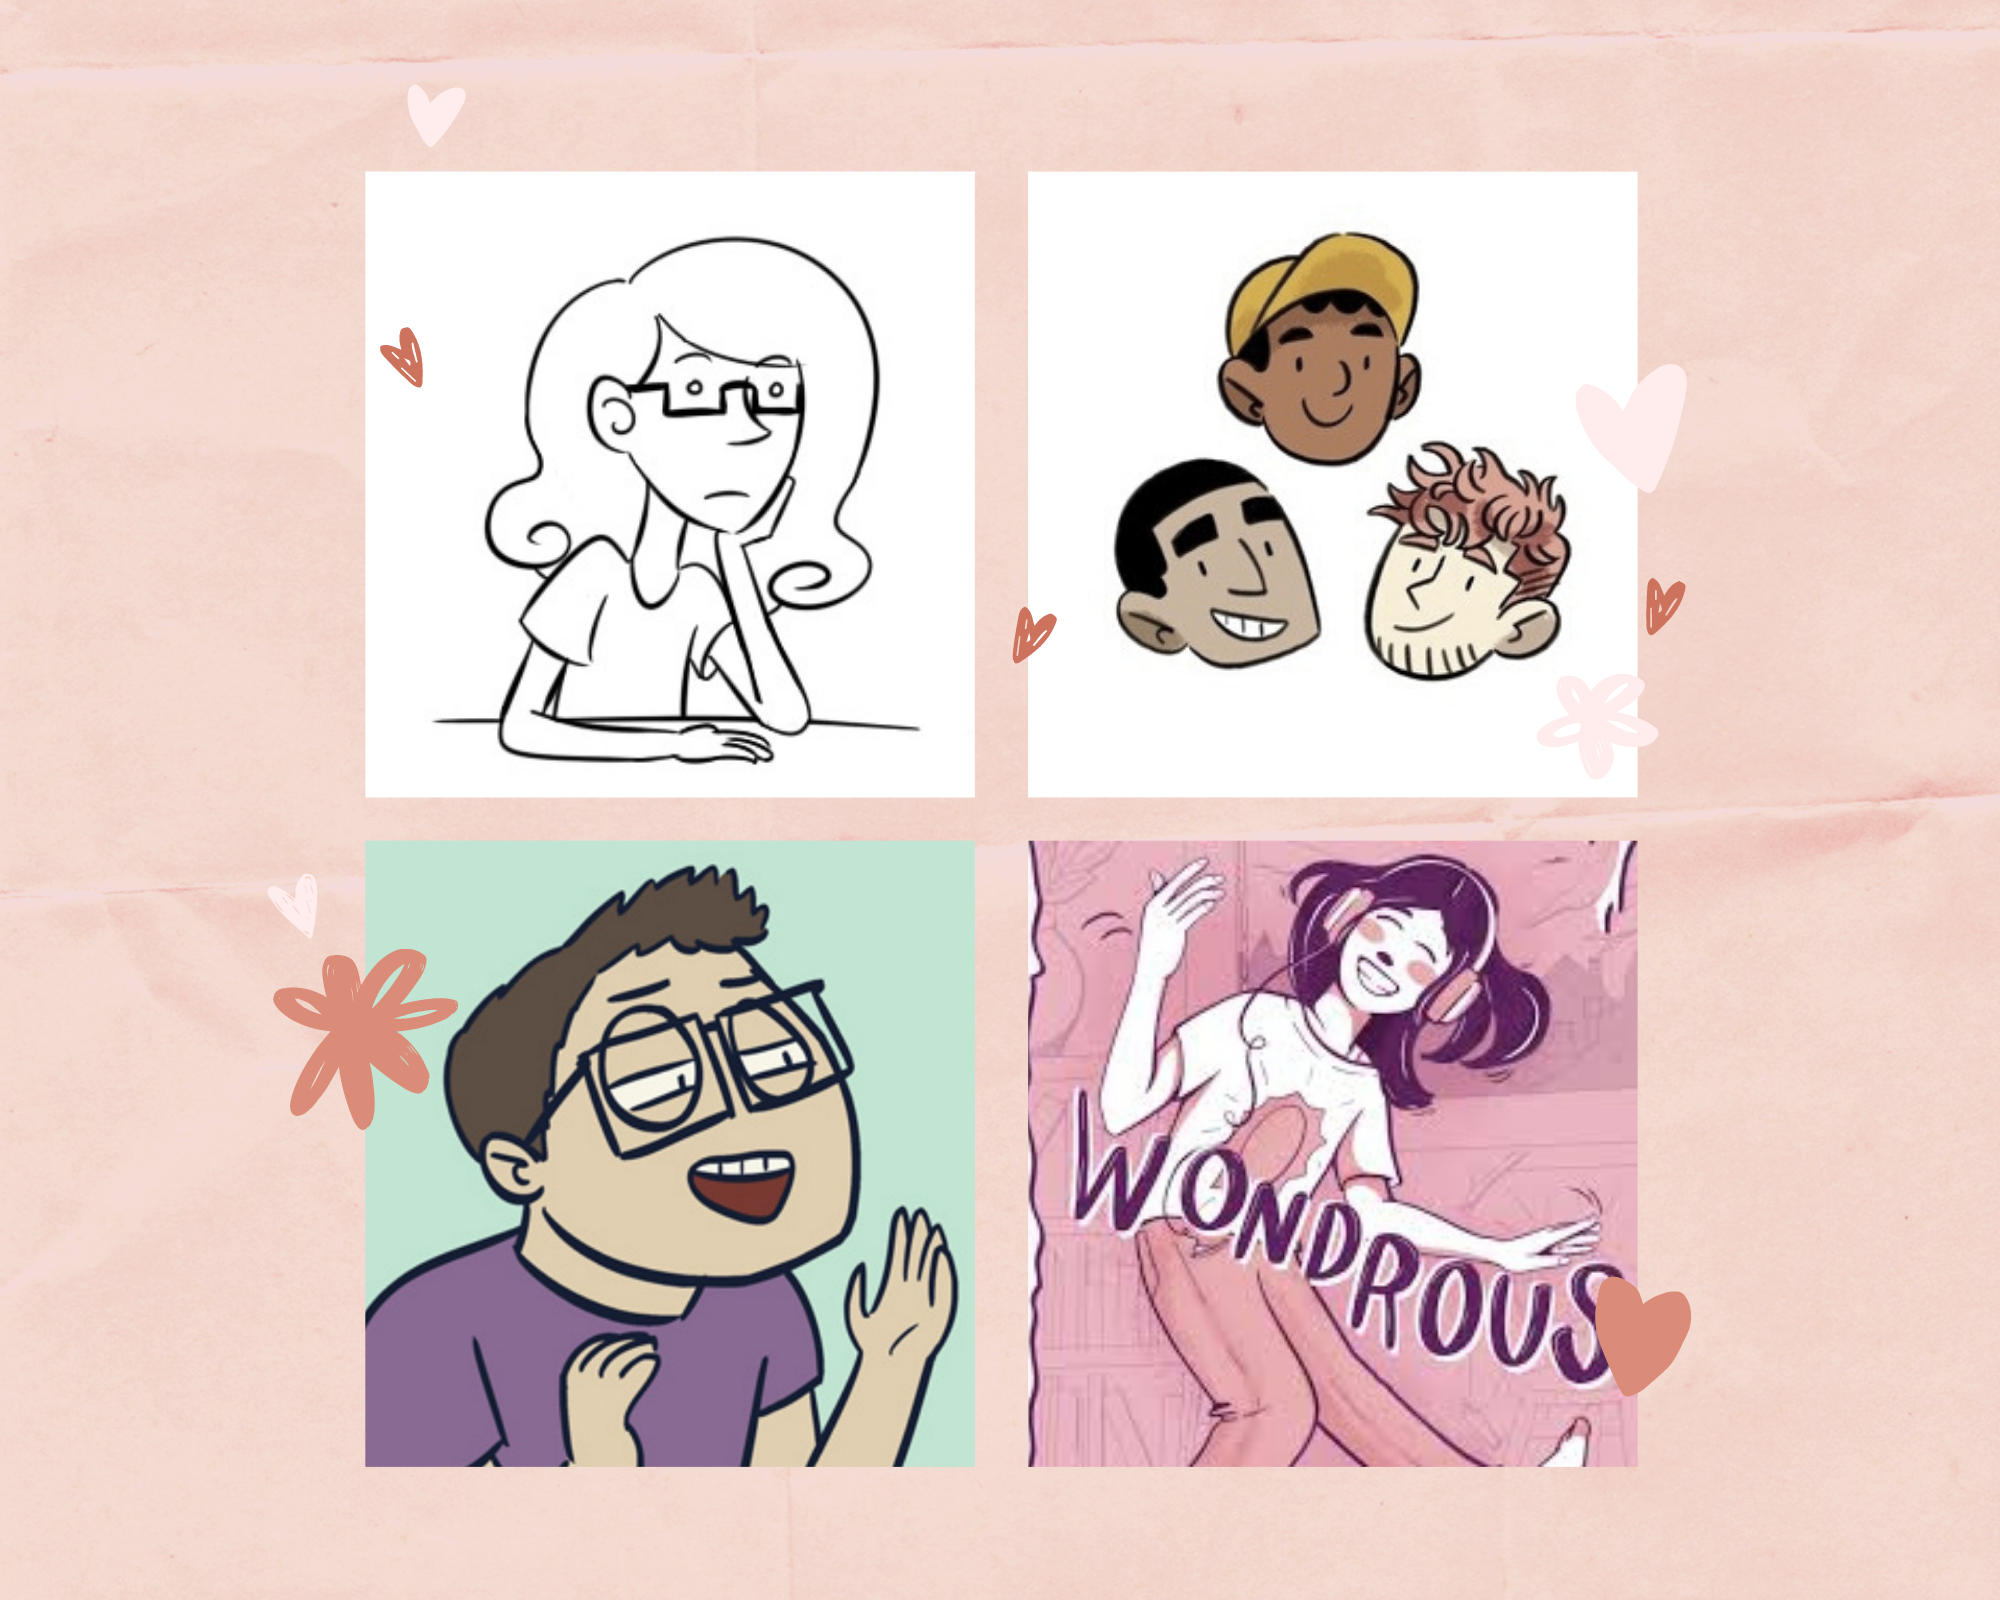 Wednesday Webcomics: Four LGBTQ+ Slice of Life Webcomics to Check Out